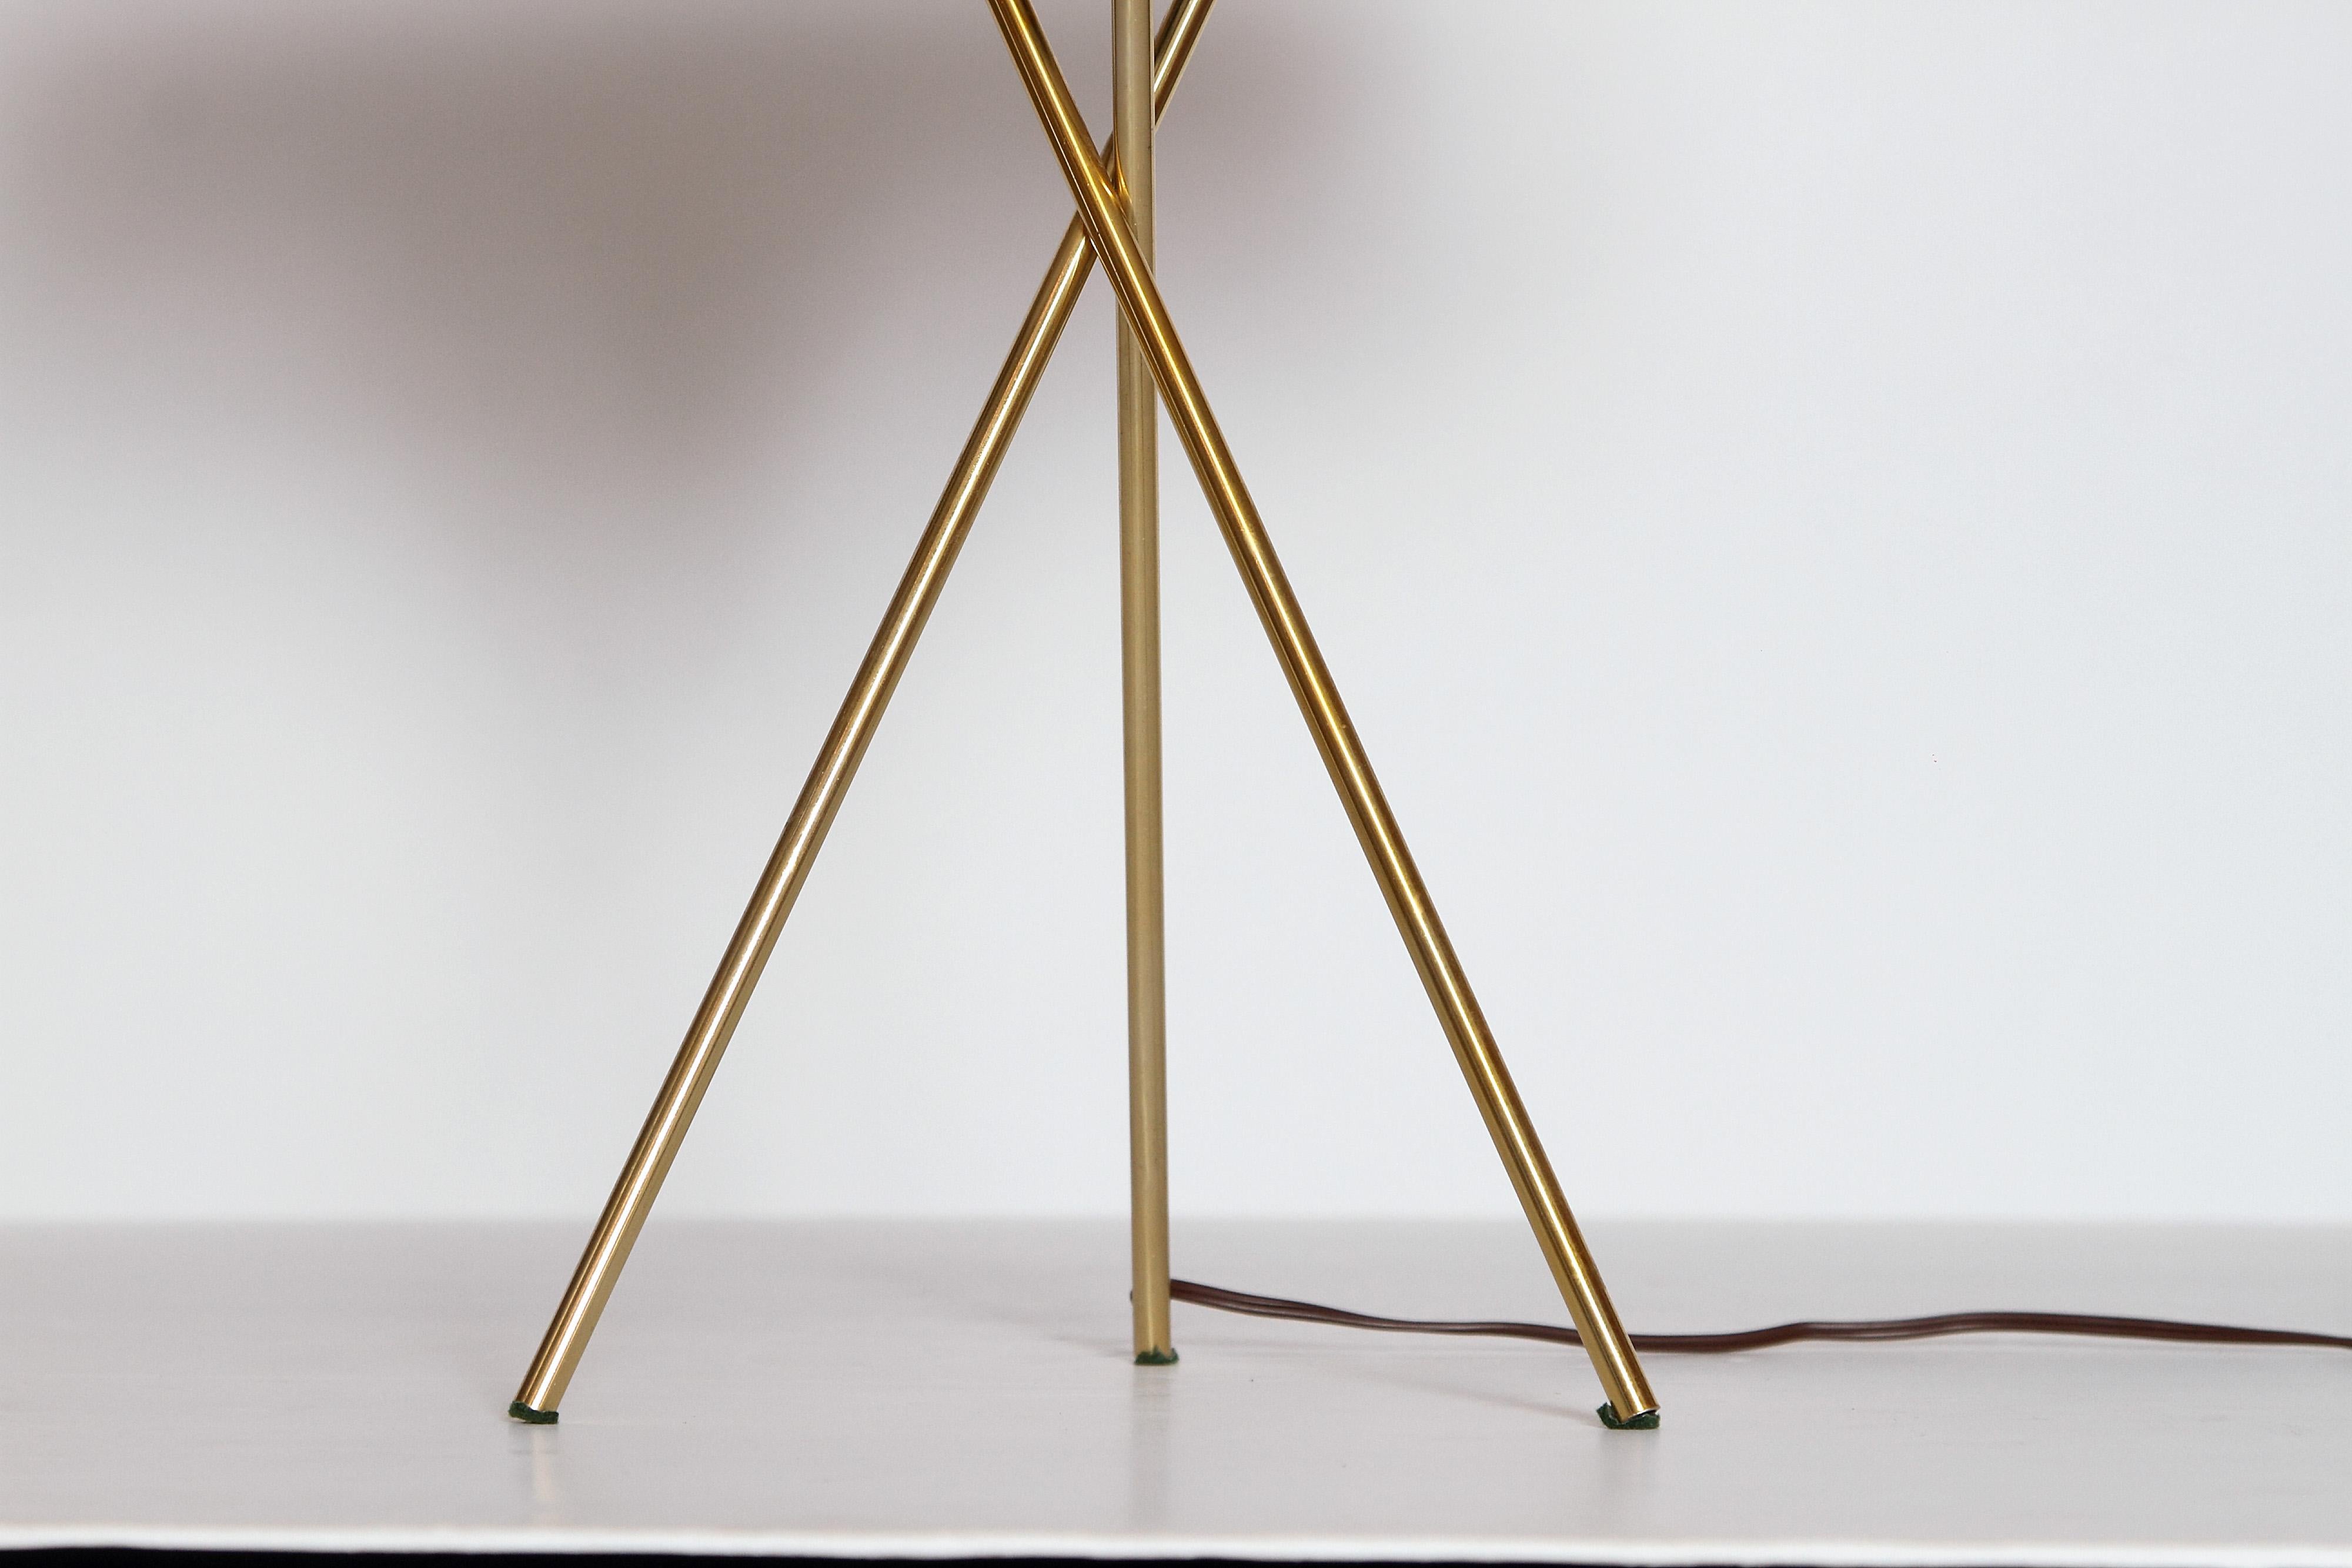 Painted Mid-Century Modern Tripod Table Lamp by Gerald Thurston for Lightolier